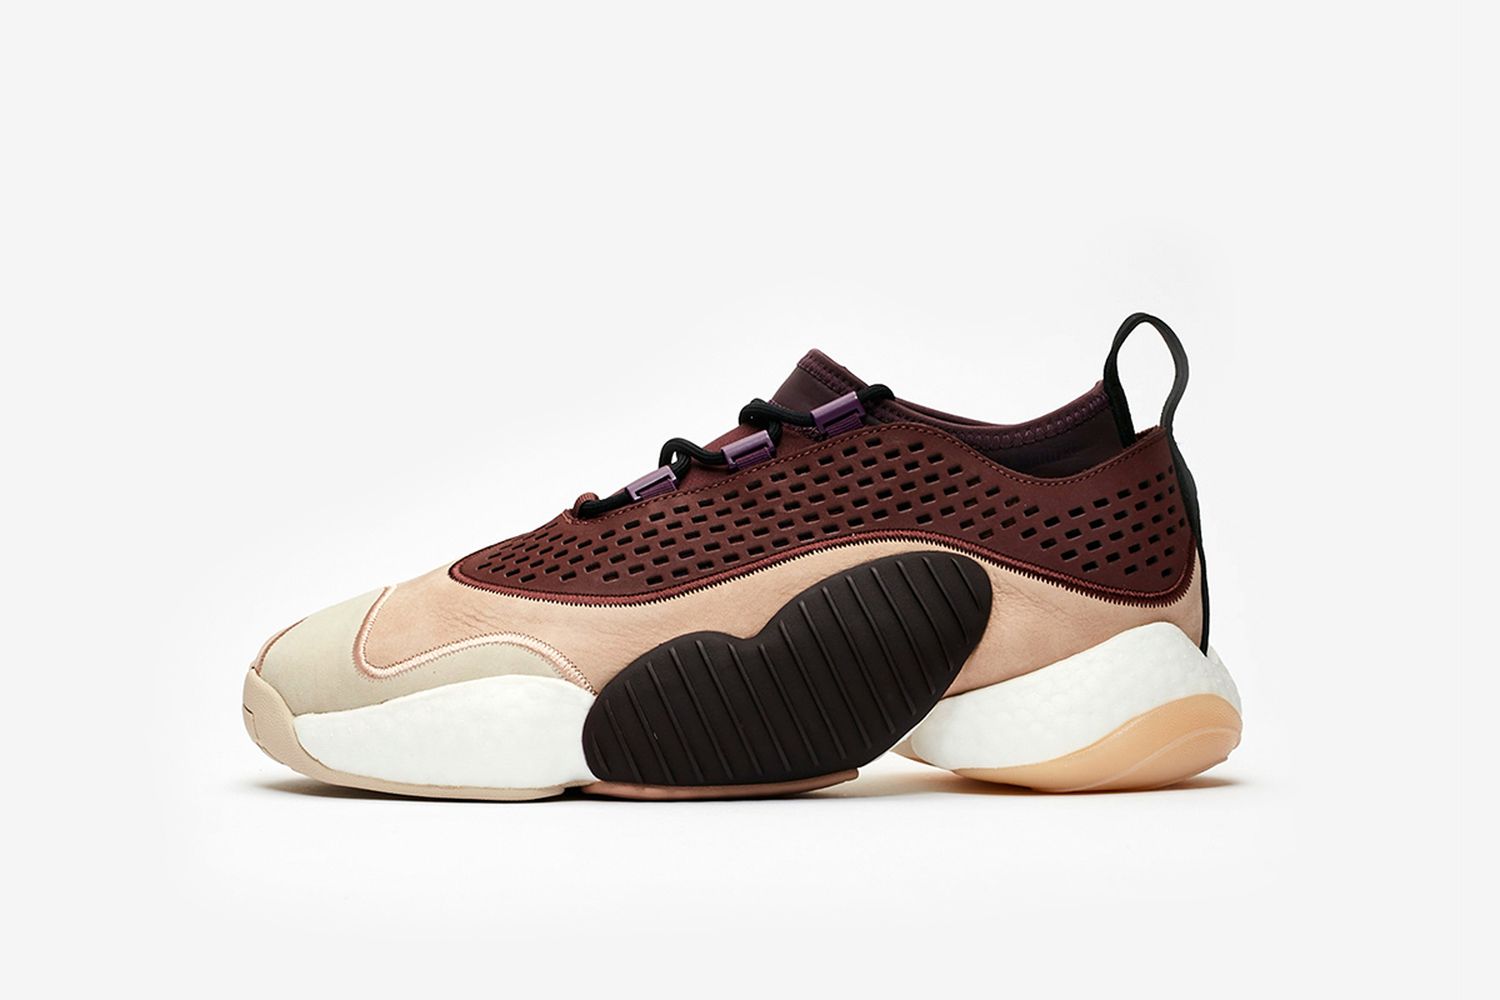 Crazy BYW